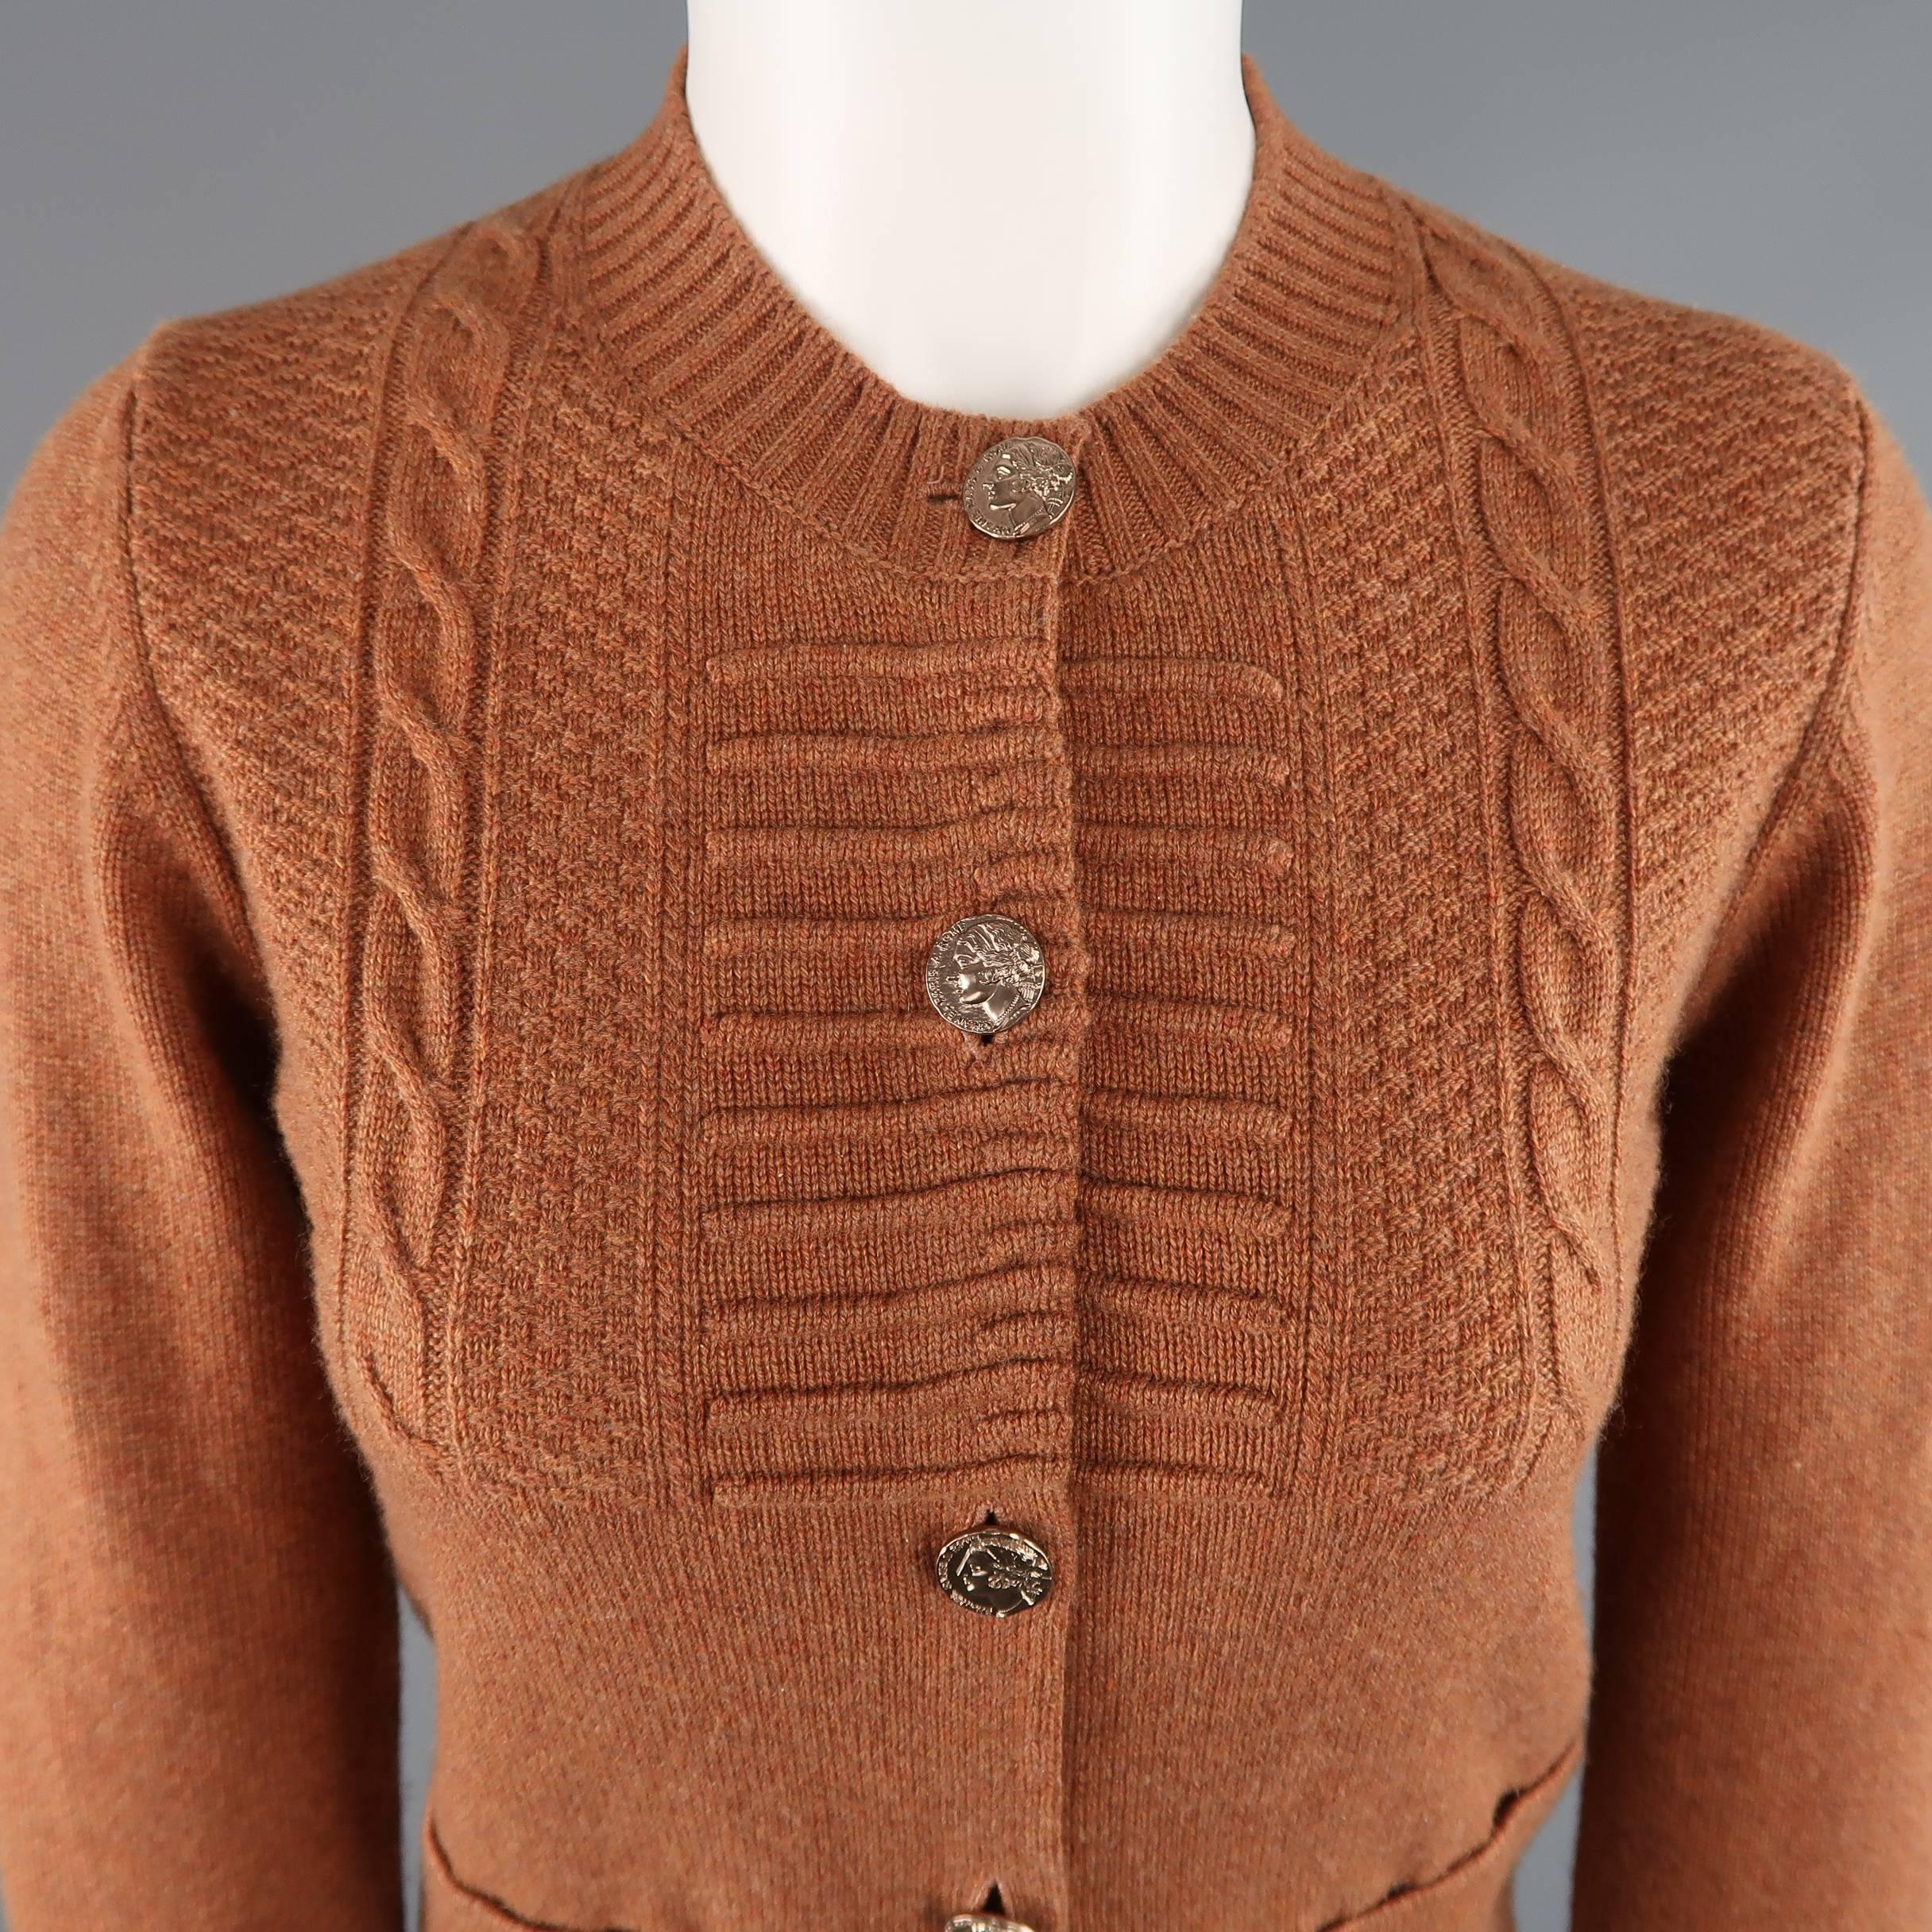 CHANEL cardigan comes in a light brown cashmere knit with a ribbed crewneck, patch pockets, unique cable knit textured panels and silver tone Paris A Rome coin buttons. Made in UK.
 
Excellent Pre-Owned Condition.
Marked: FR 36
 
Measurements:
